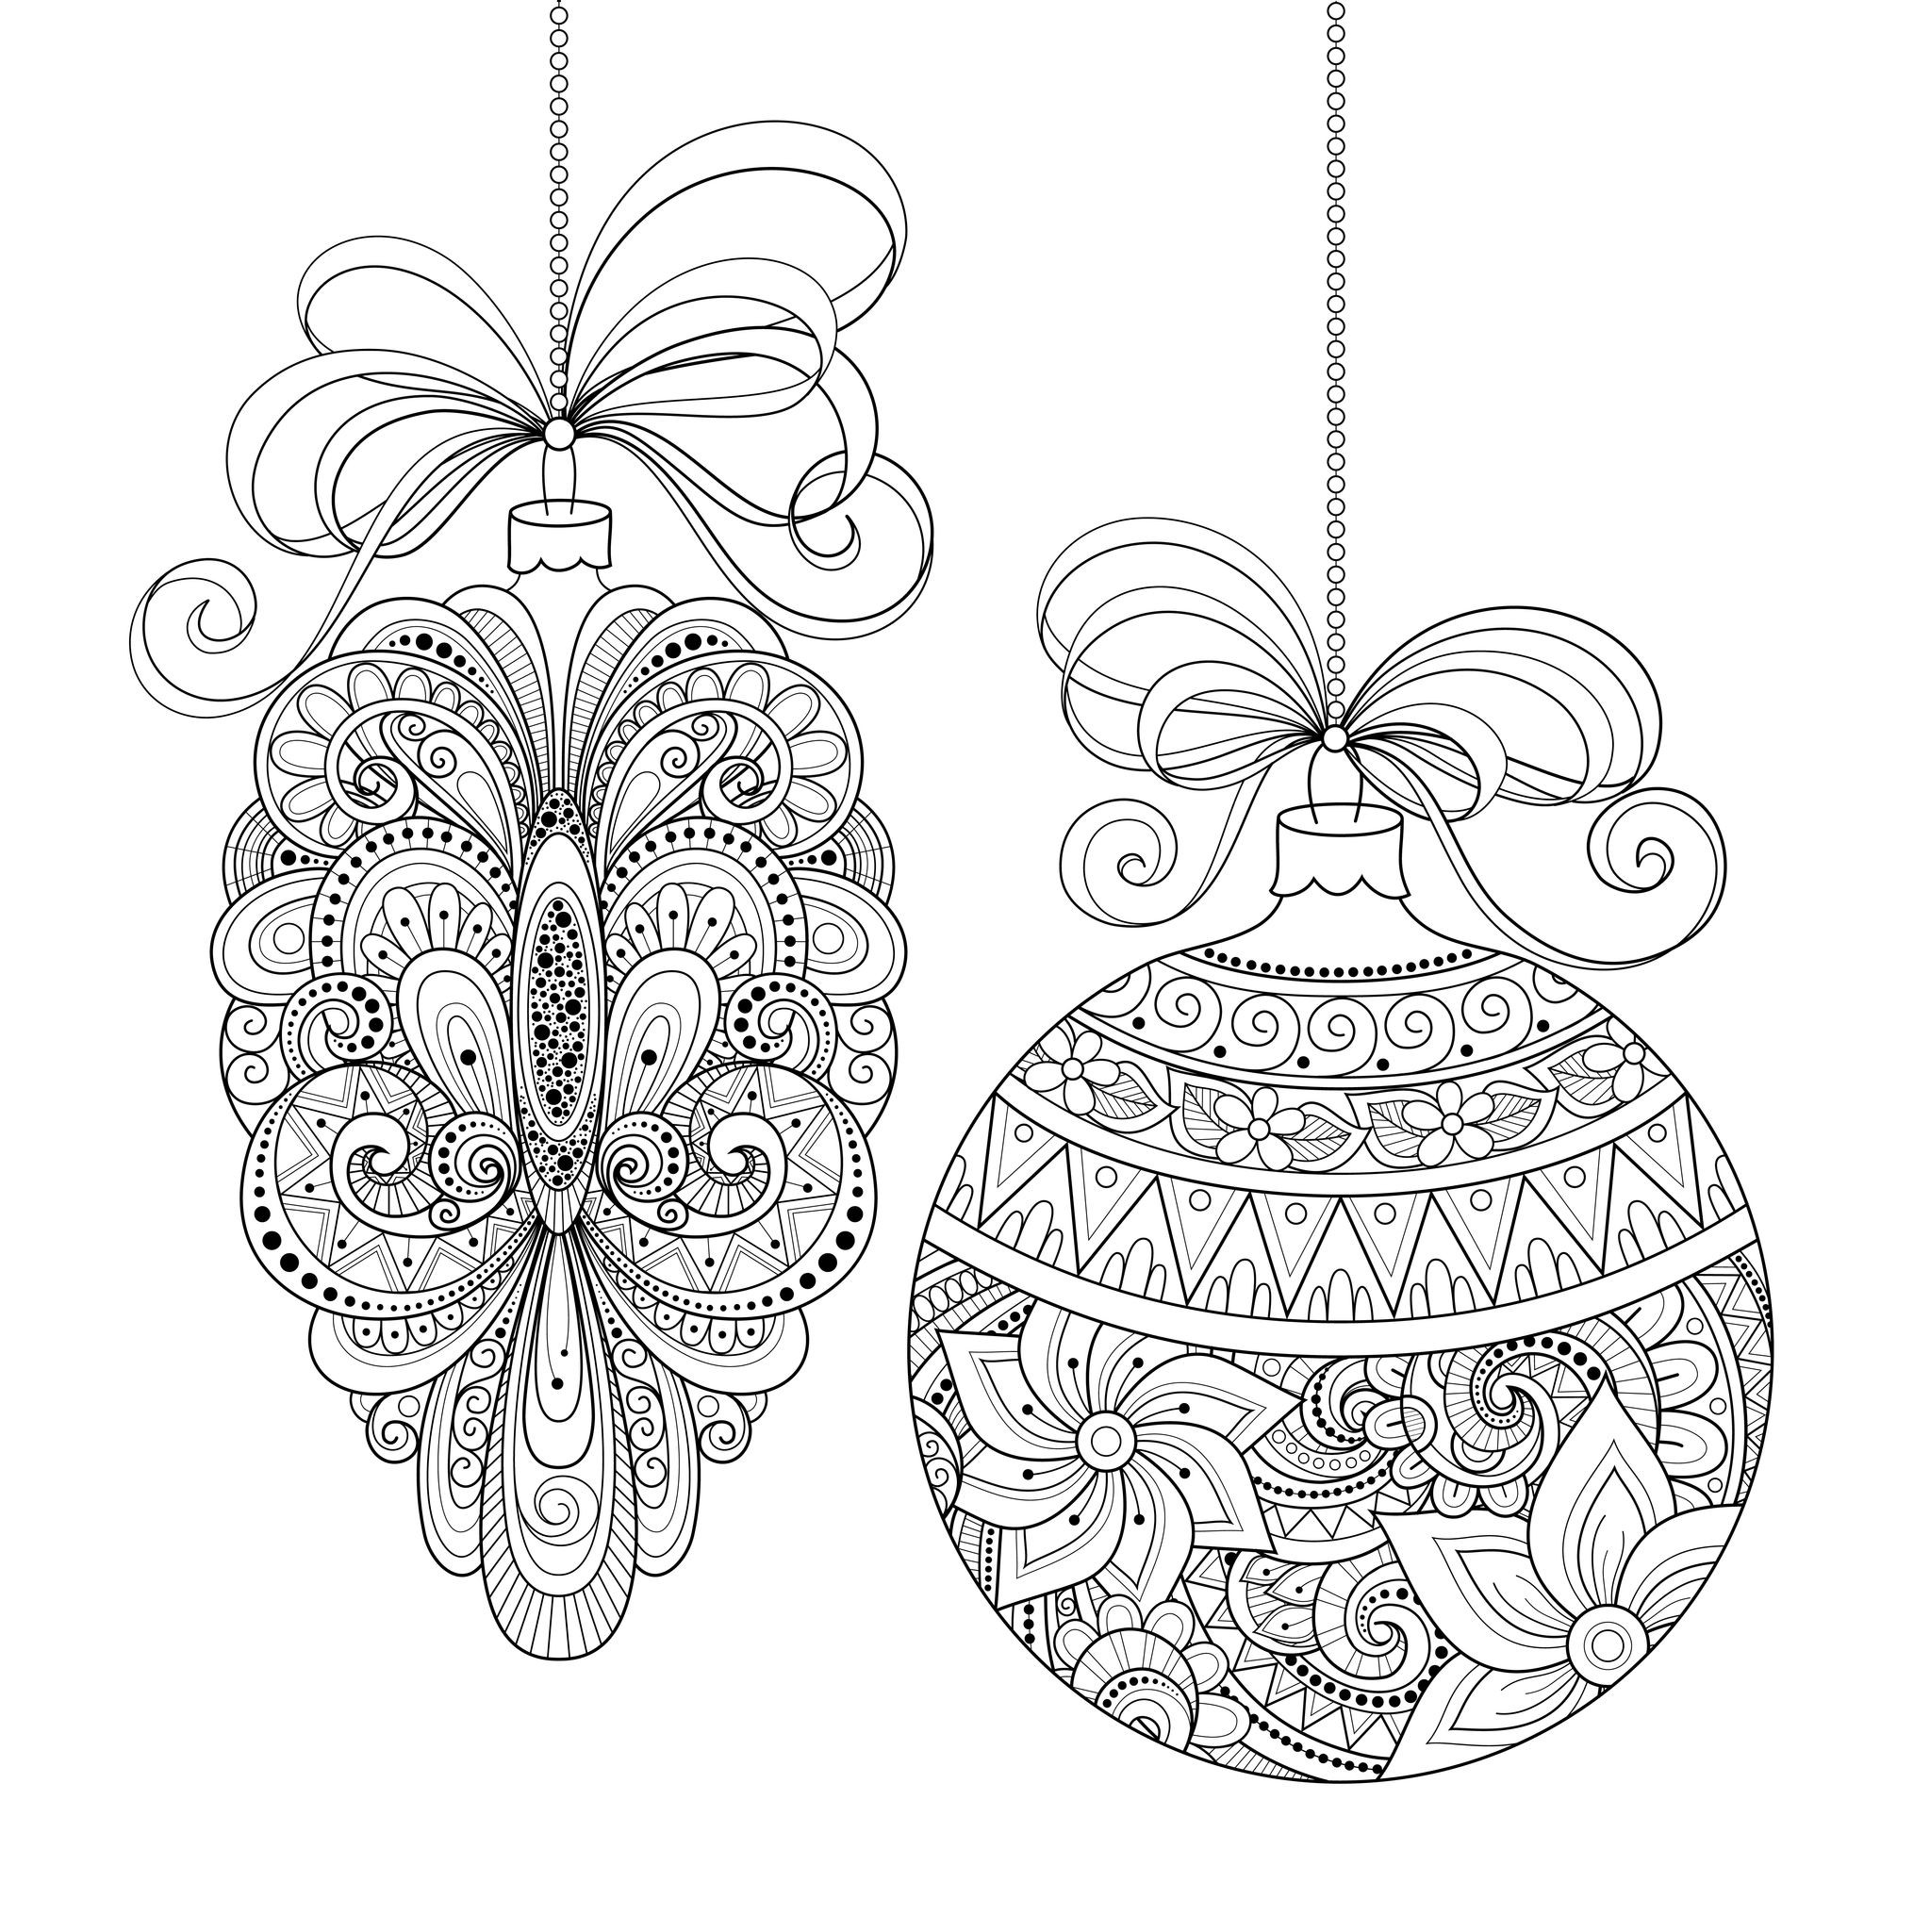 Christmas Ornaments Coloring Pages
 Christmas Coloring Pages for Adults Best Coloring Pages